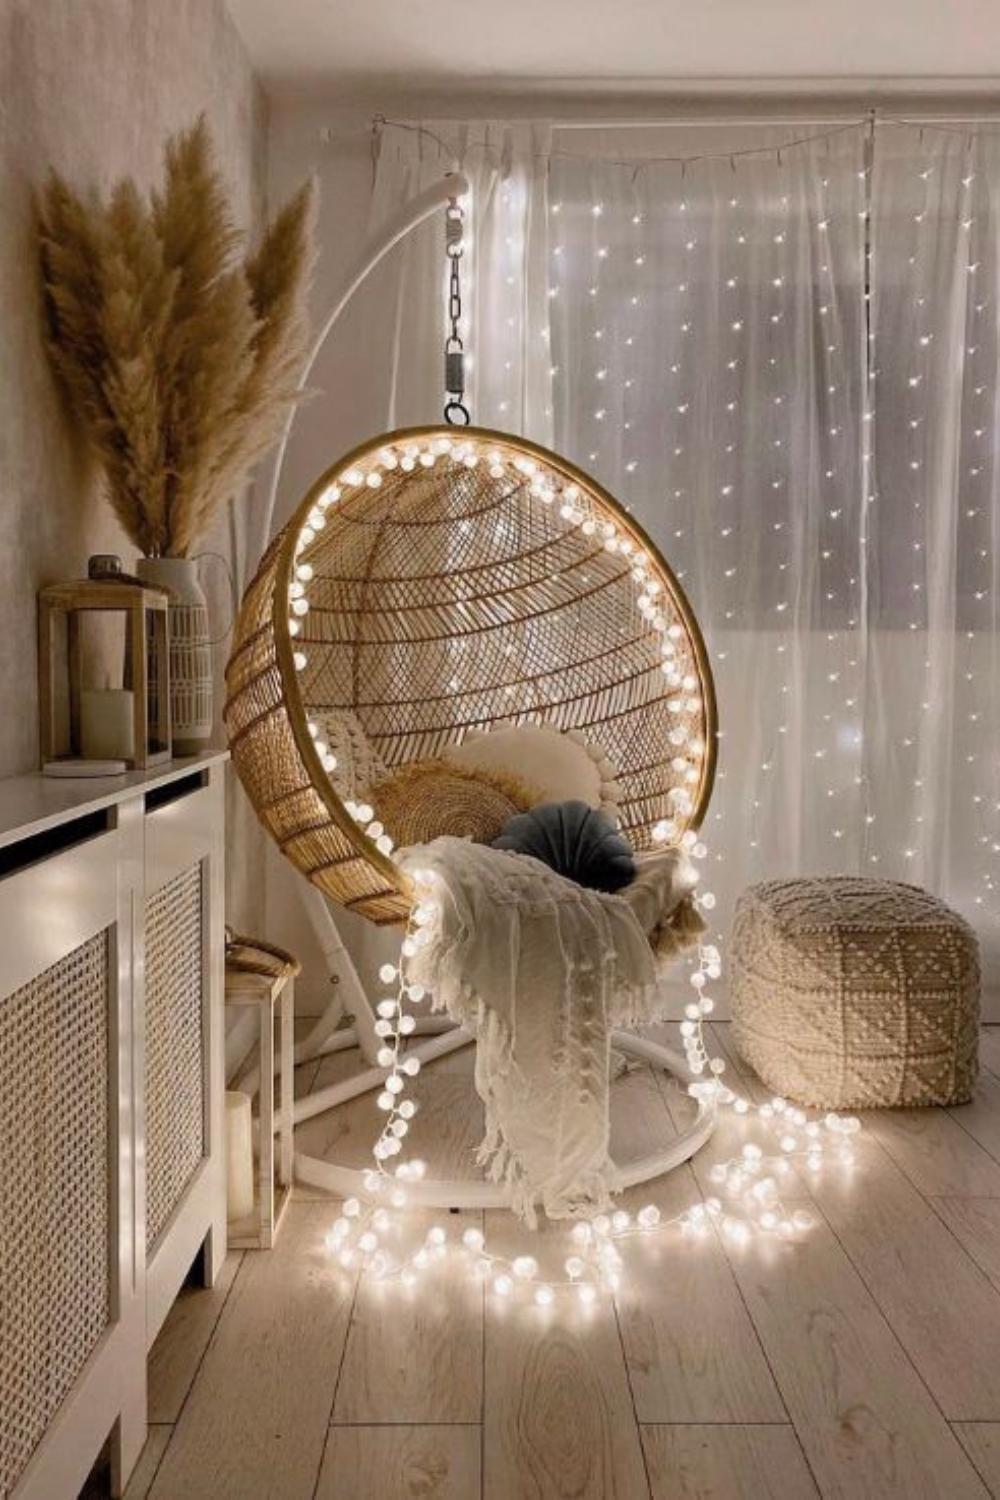 Decorate your home with best room
decoration ideas